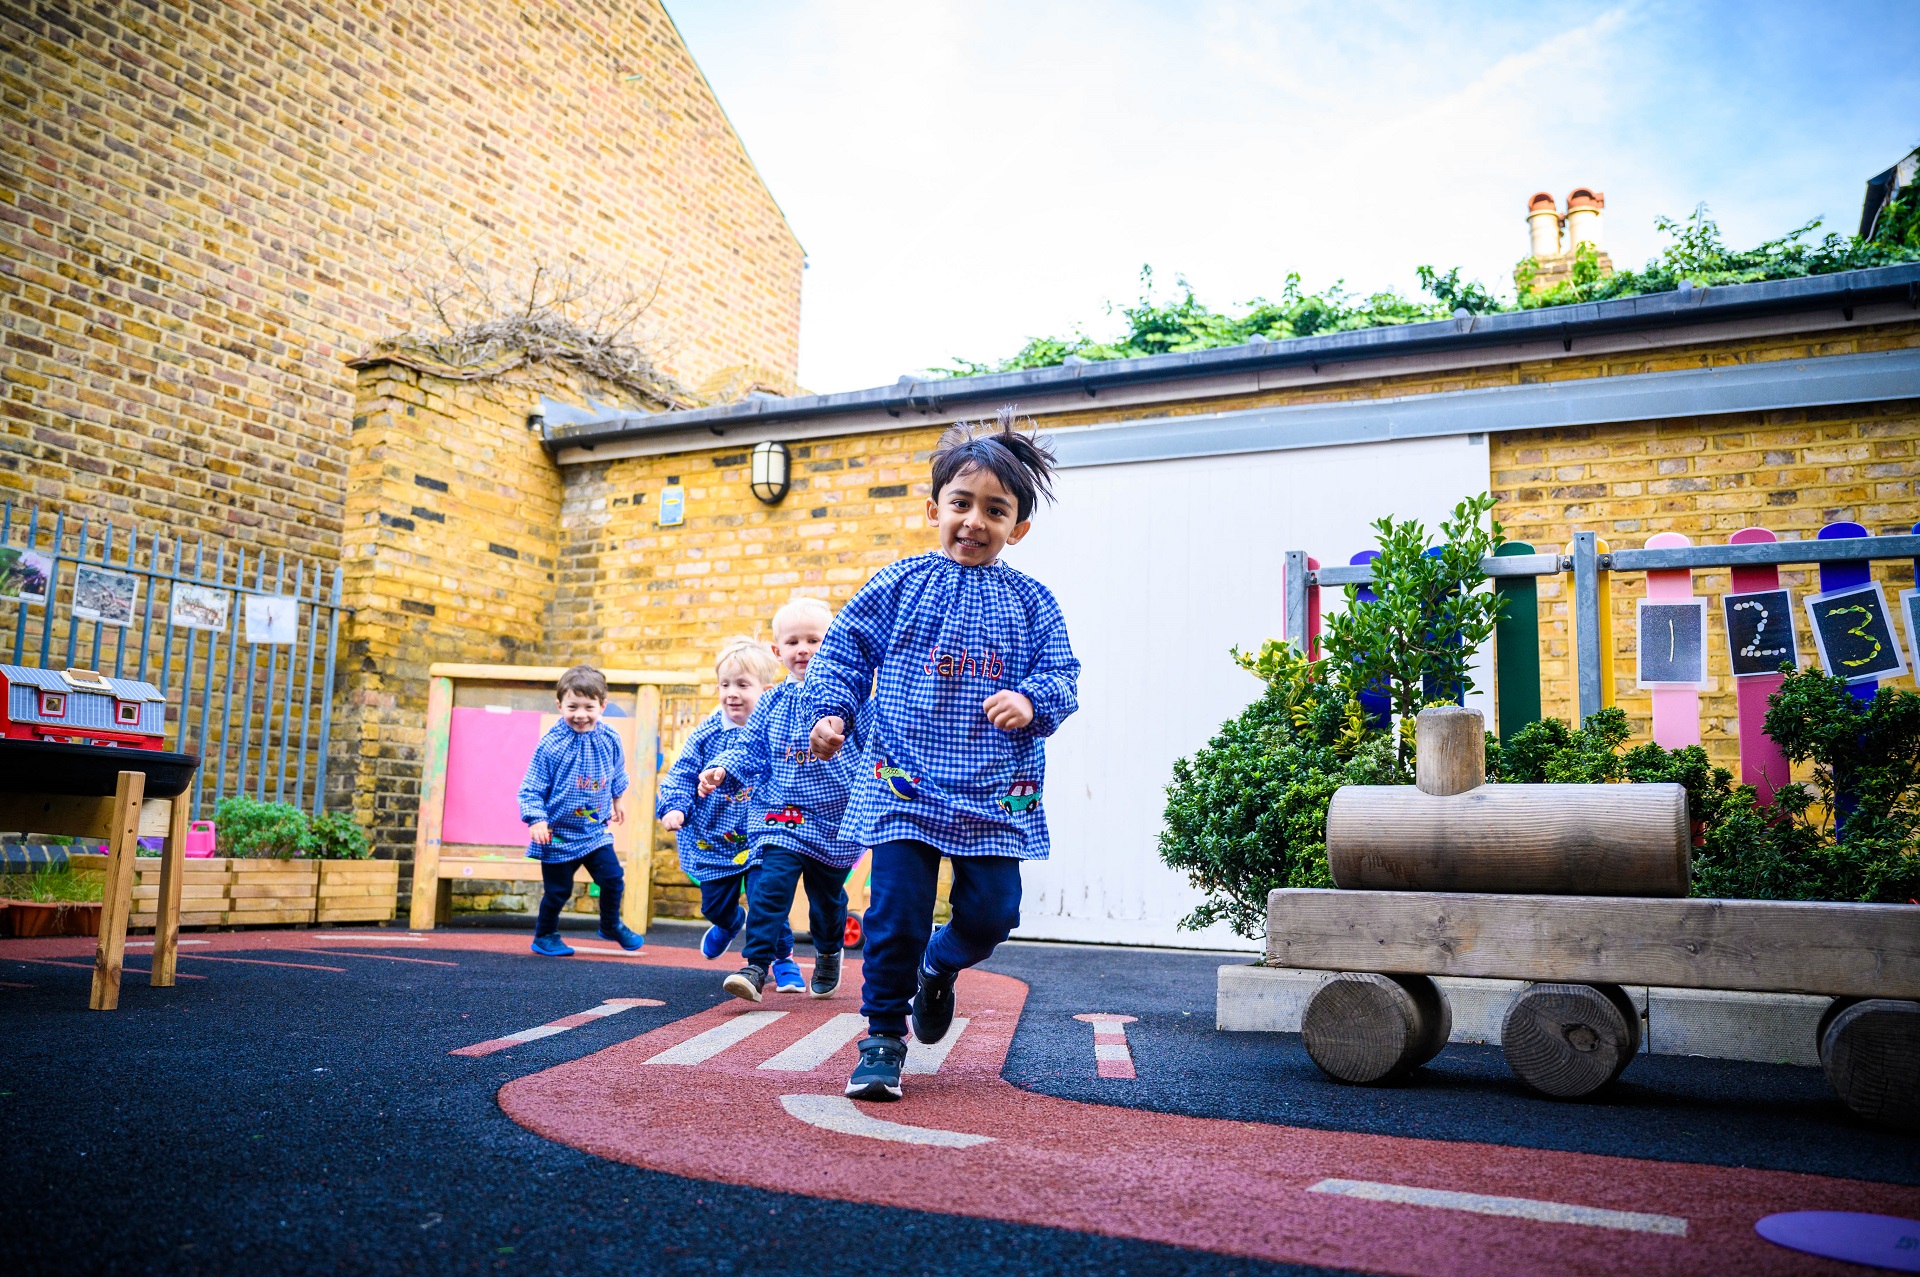 Four Nursery pupils run across the playground wearing the blue gingham KHN smocks.